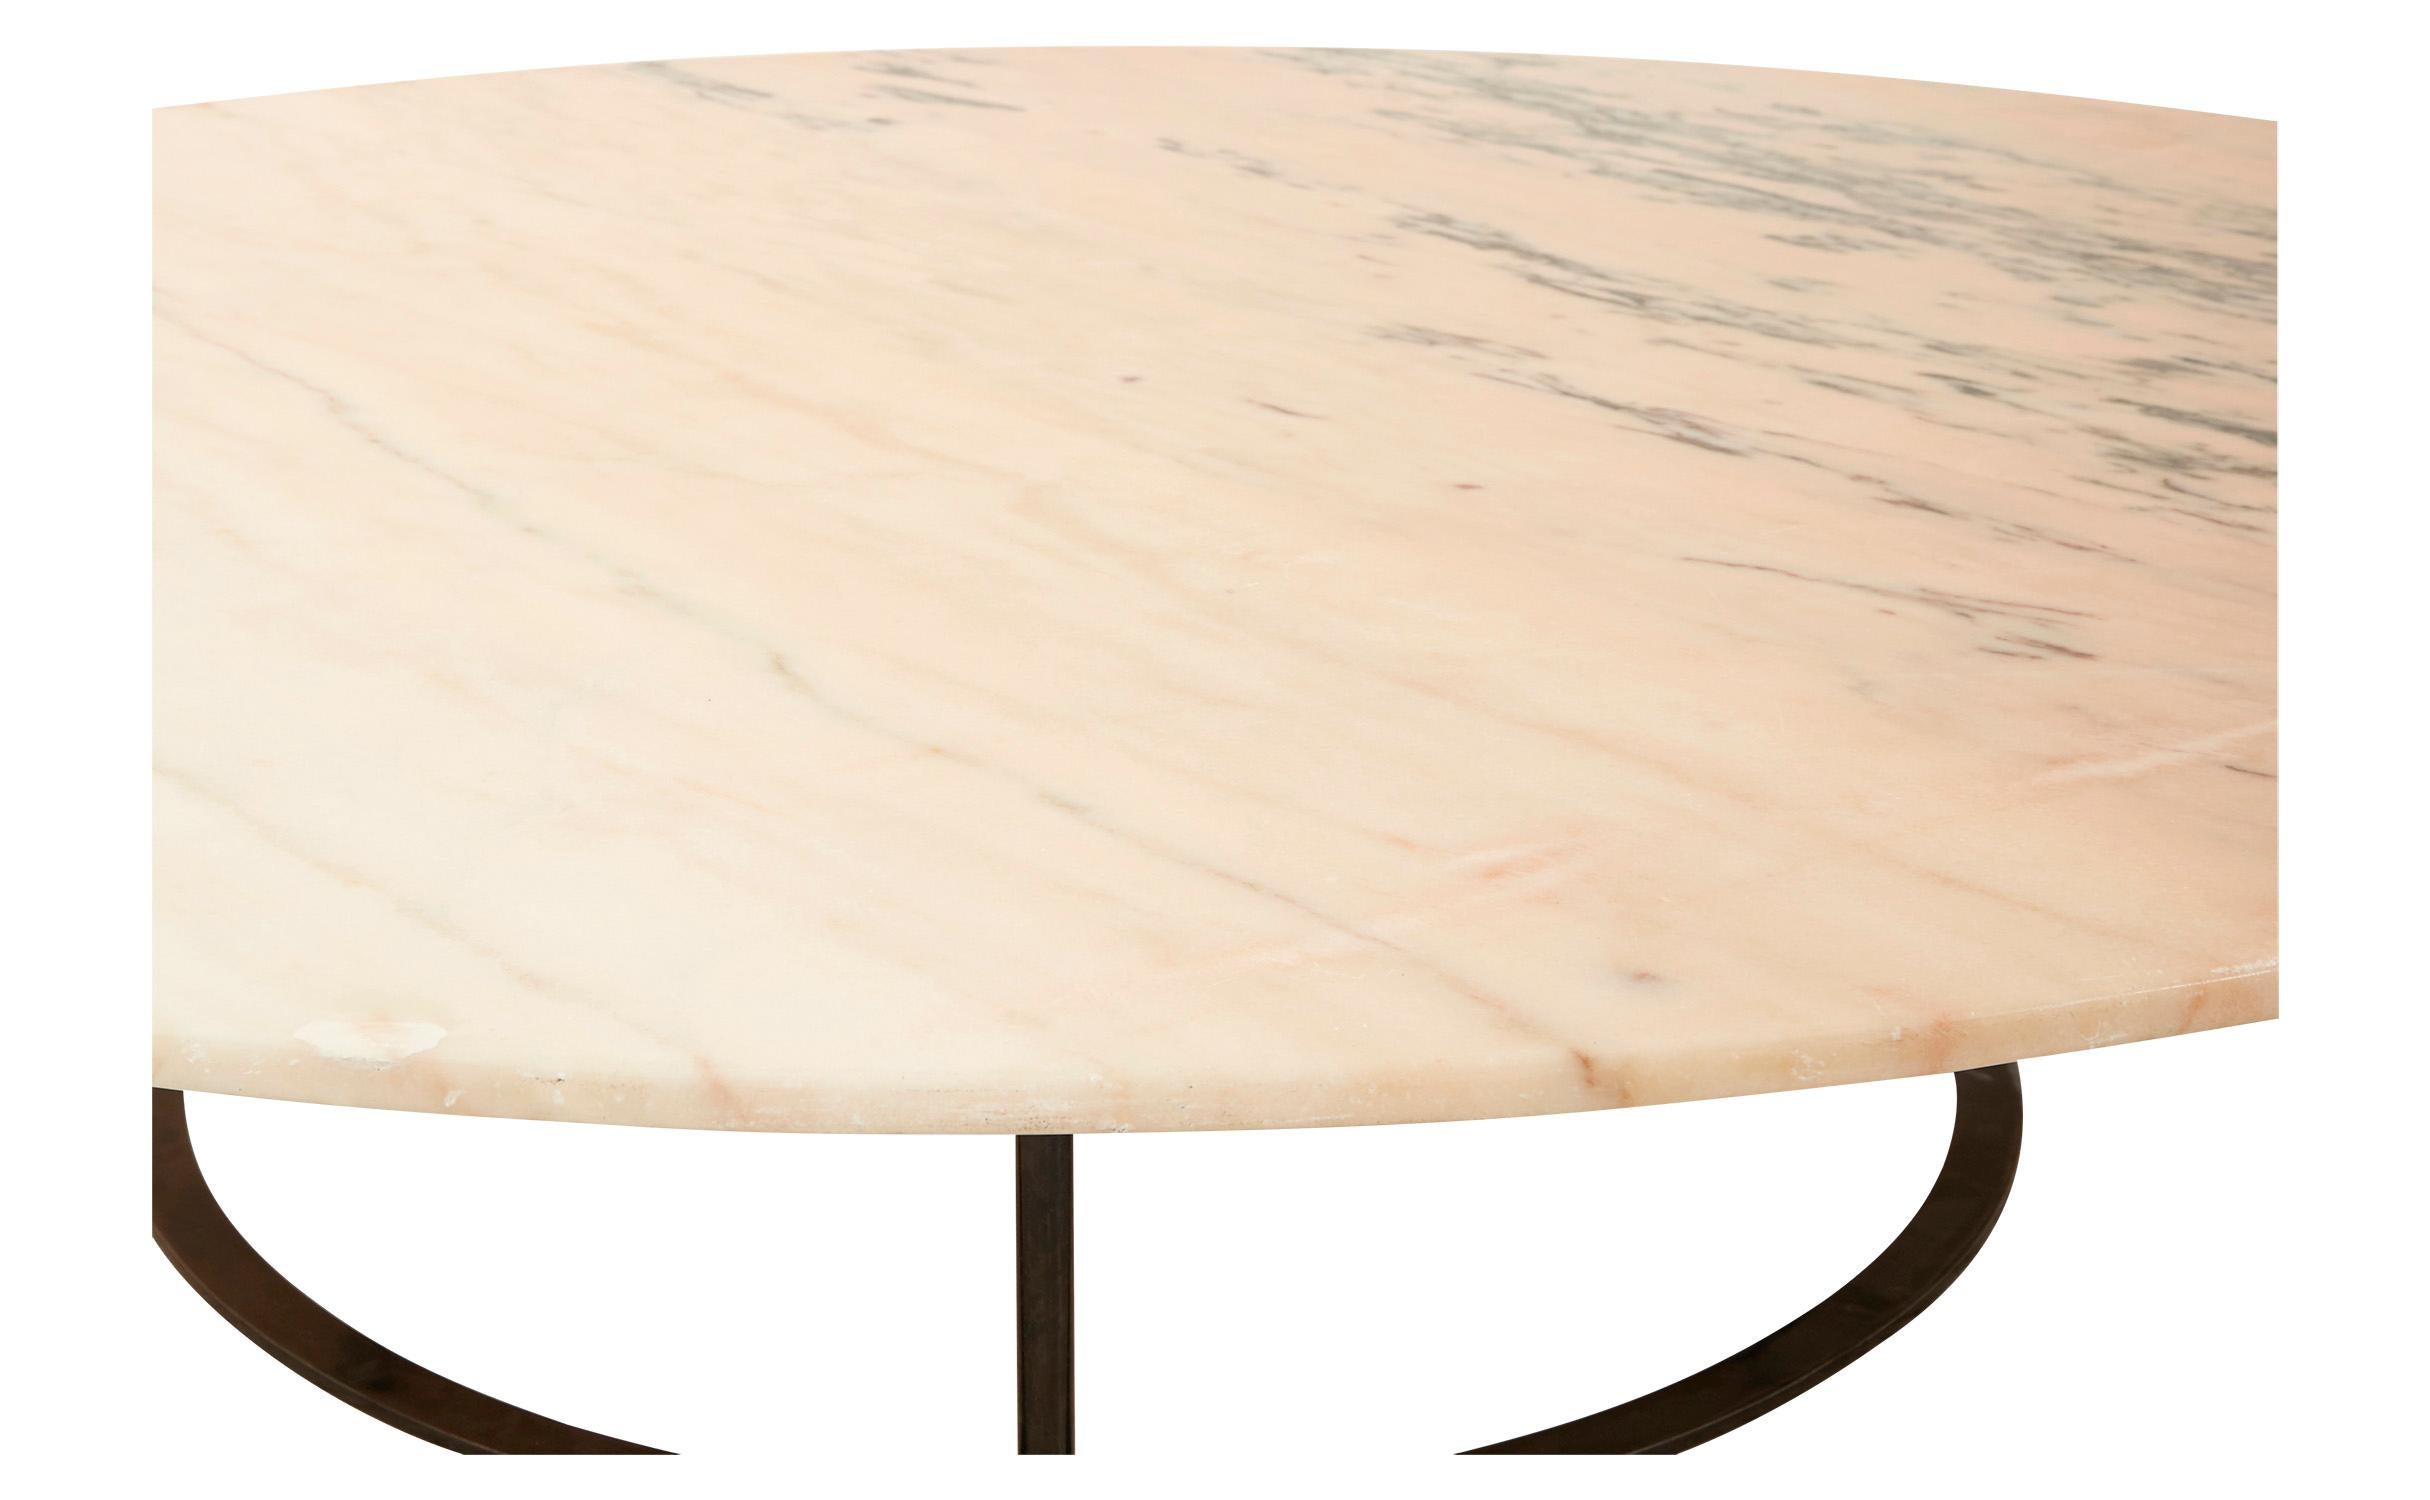 20th Century Spanish Midcentury Pink Marble Coffee Table